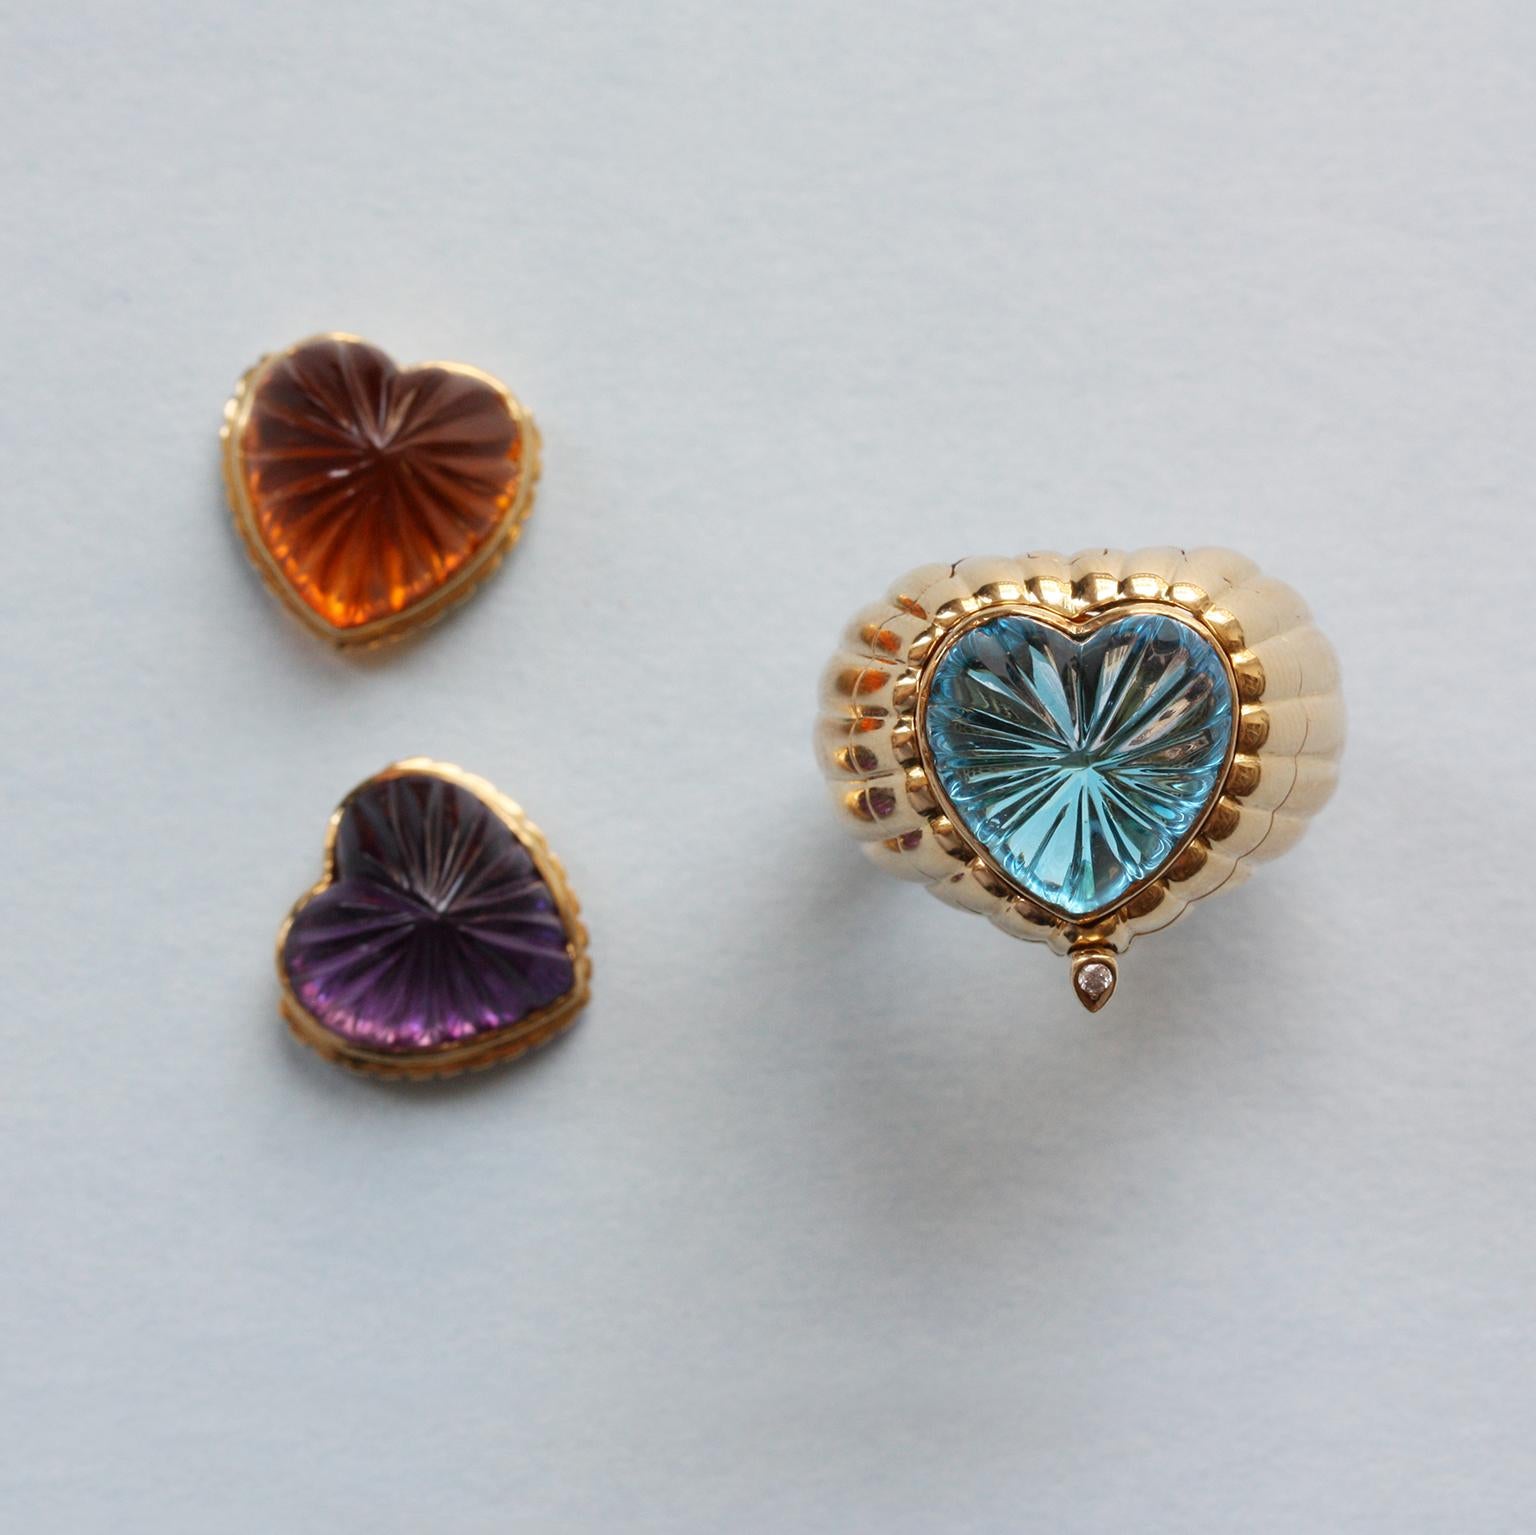 An 18 carat gold ribbed tartelette ring interchangeable set with a ribbed heart shaped citrine, amethyst or a blue topaz, the ring opens with a diamond set button and has a beautiful open worked honey comb structure on the inside of the shank,